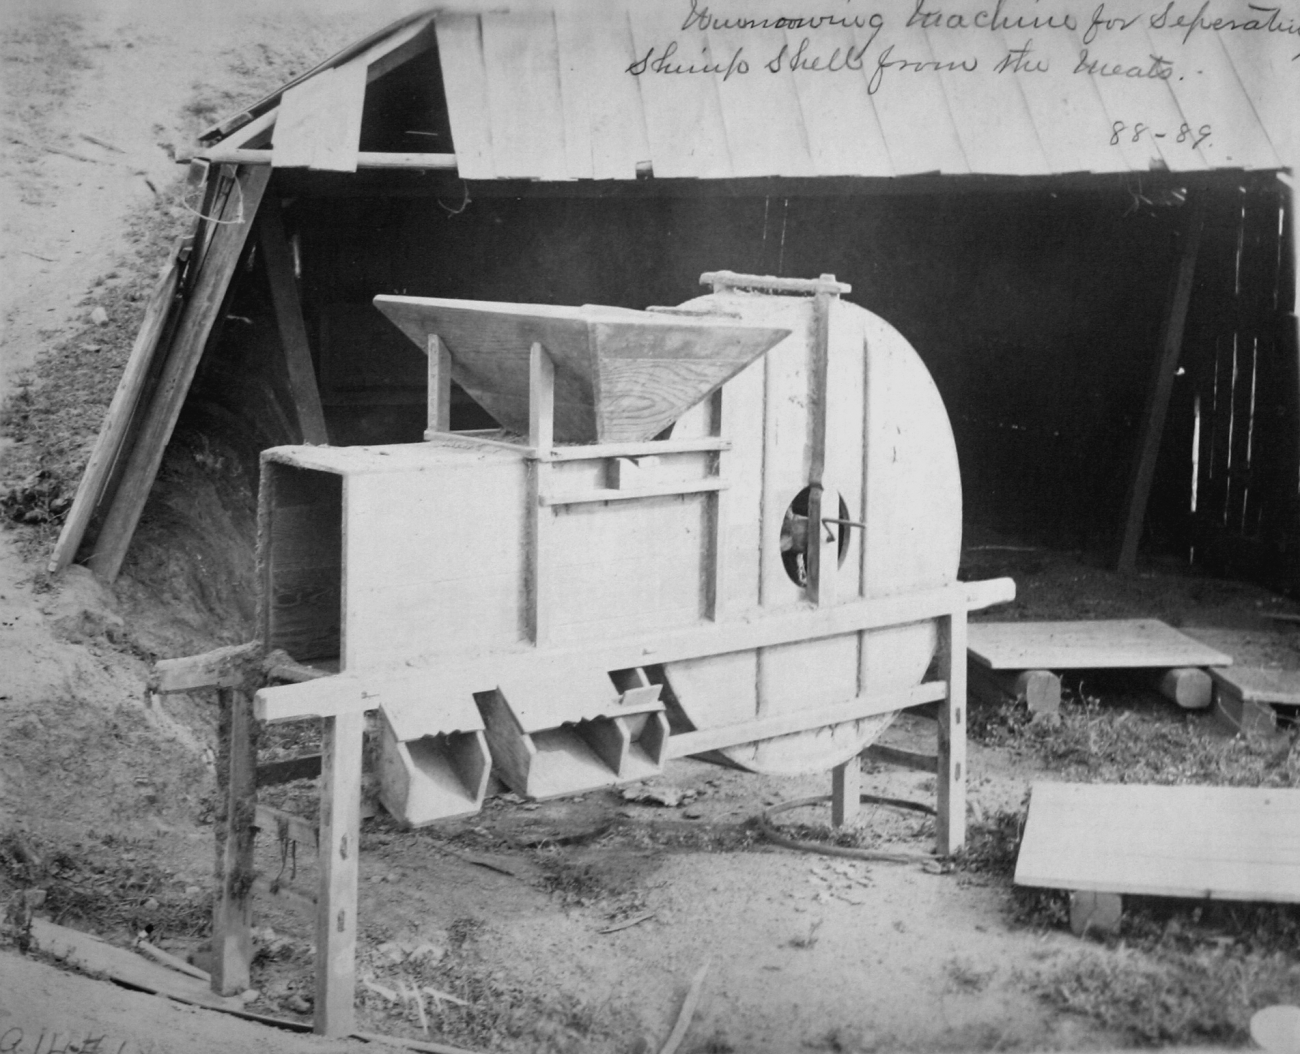 Winnowing machine for separating shrimp shells from the meats, 1888-89